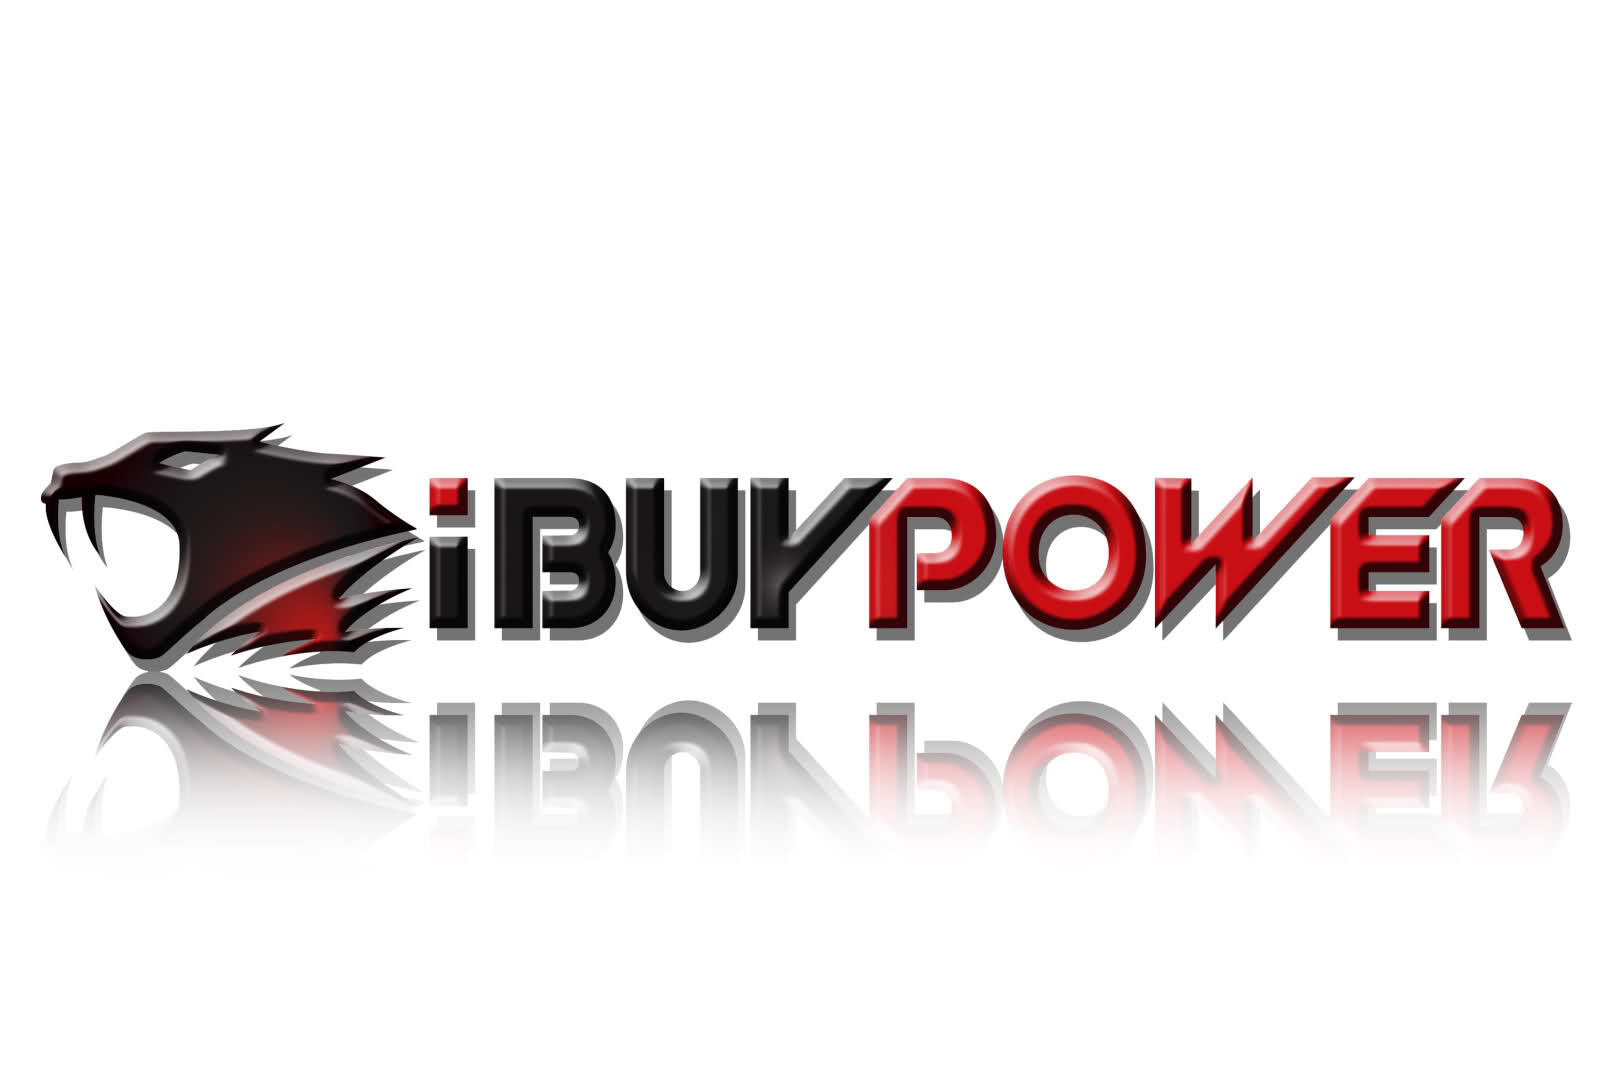 Images Ibuypower 963713 Hd Wallpaper Backgrounds Download Use them as wallp...